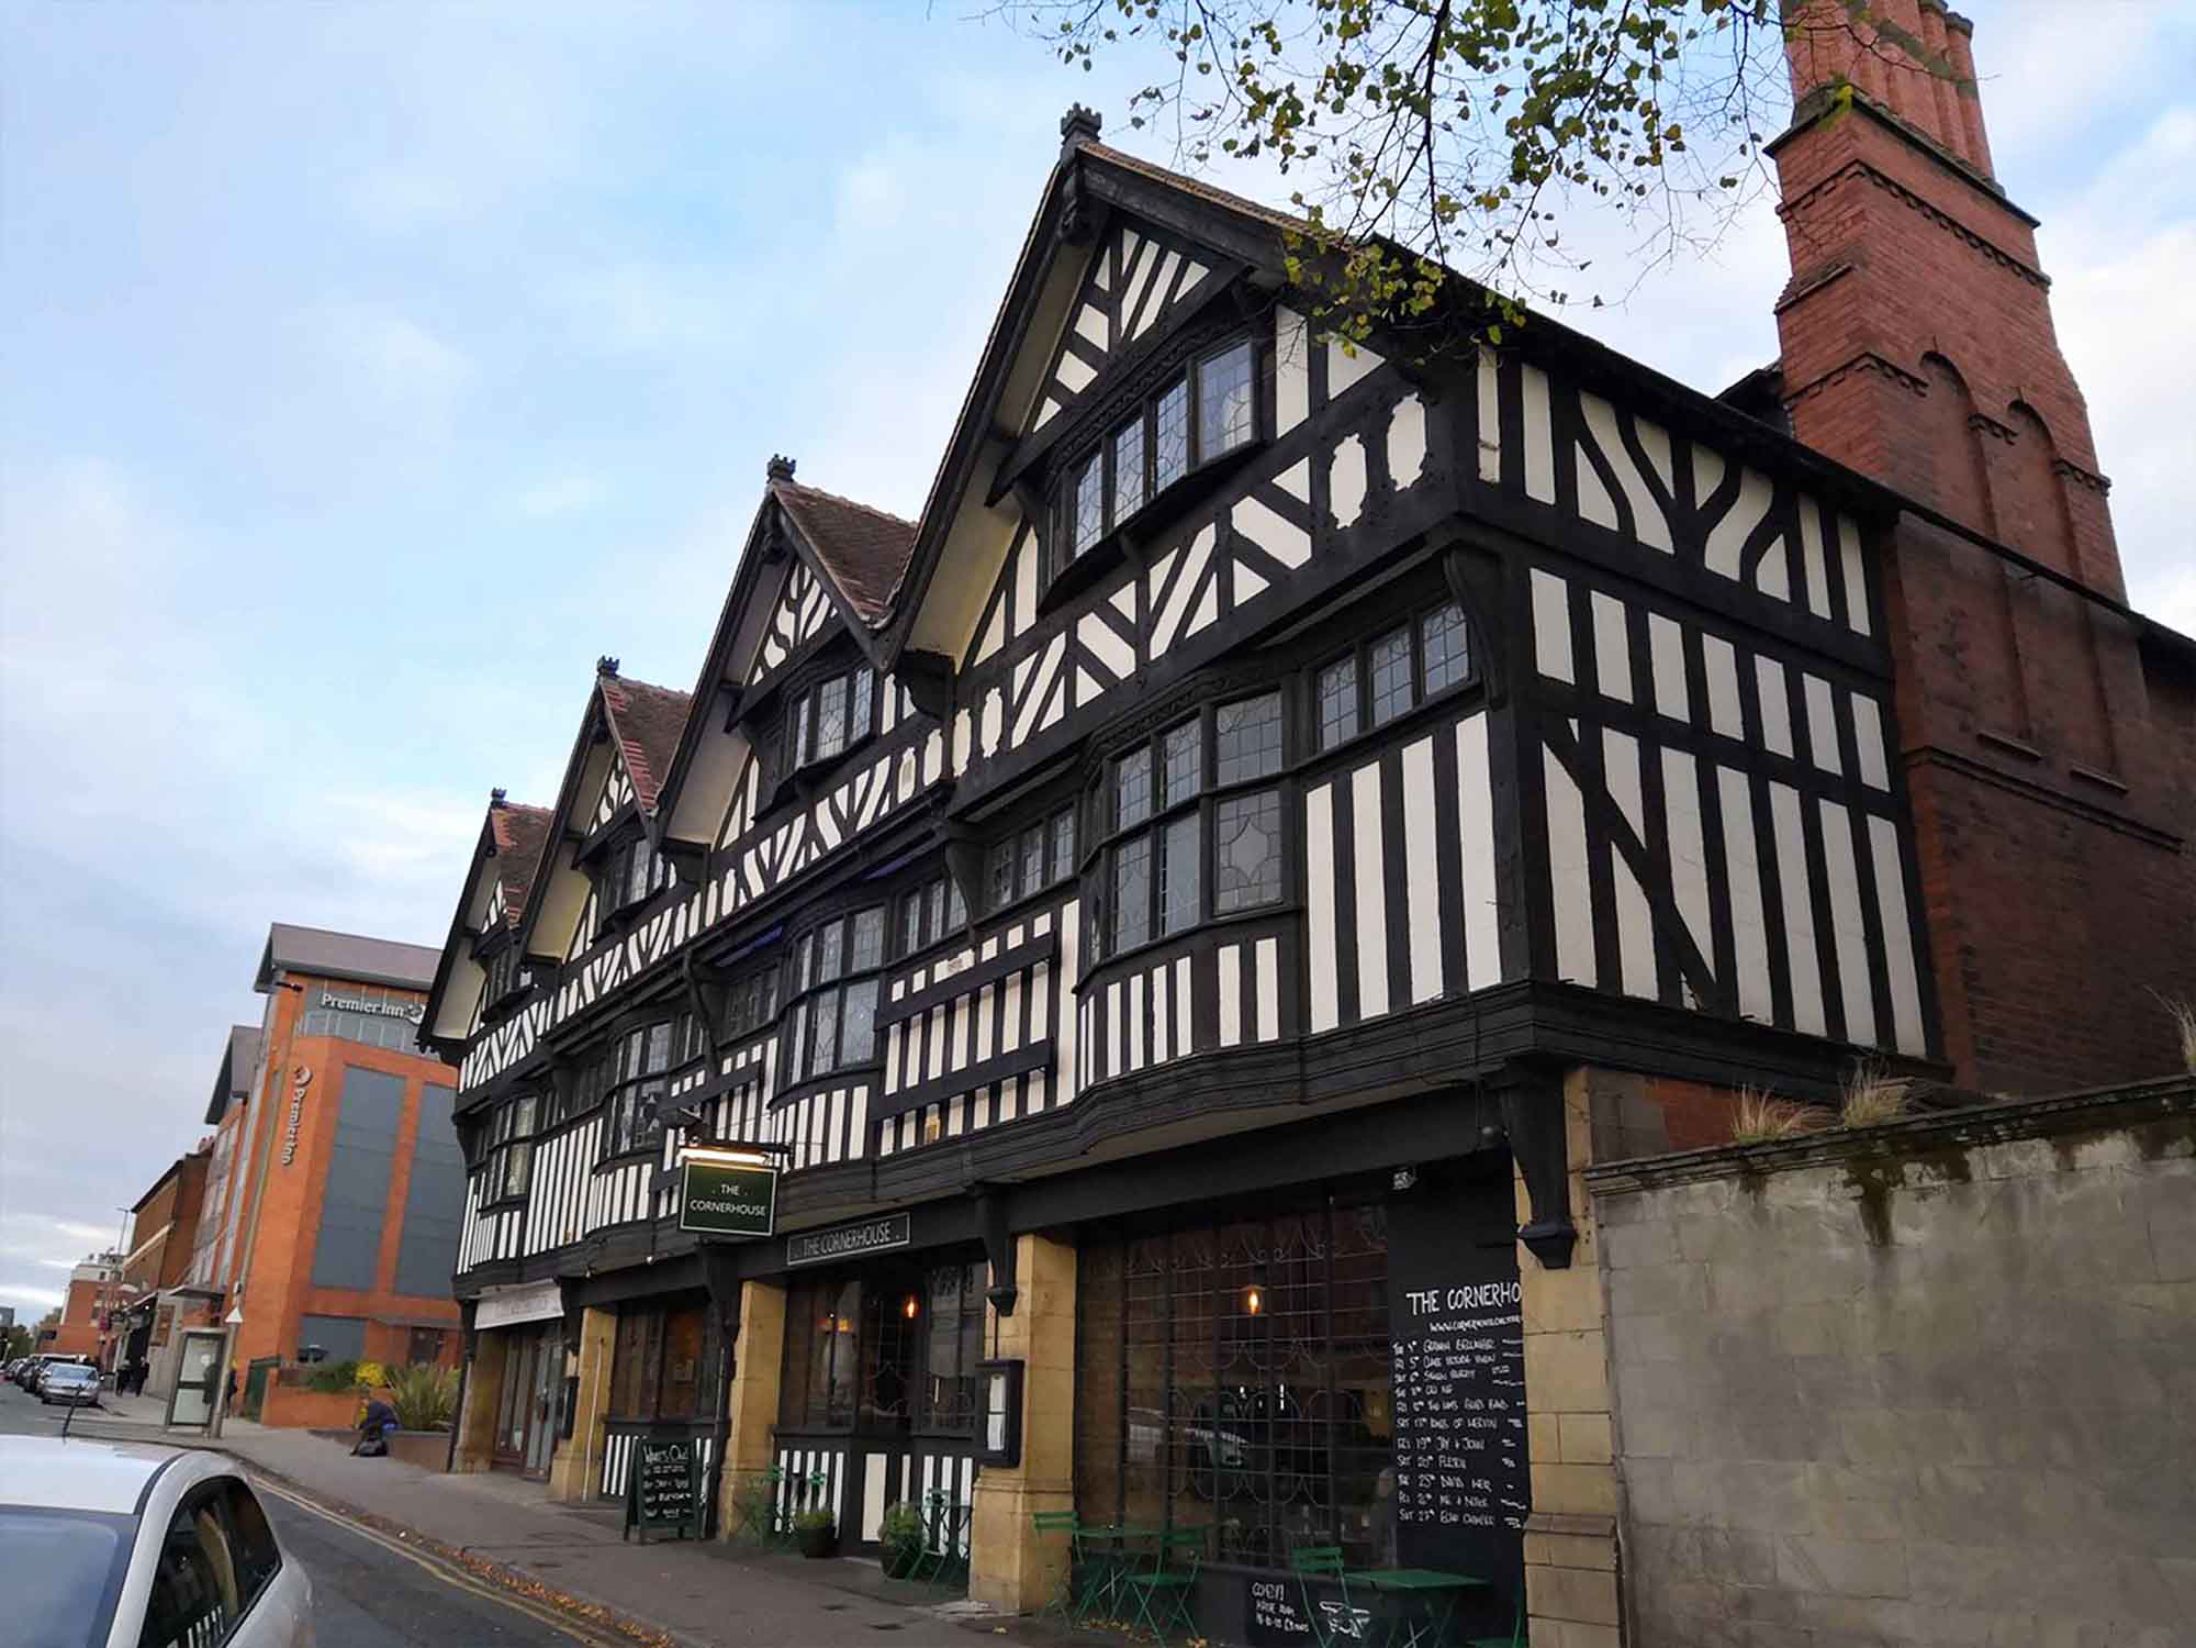 The Cornerhouse - Best Real Ale Pubs in Chester